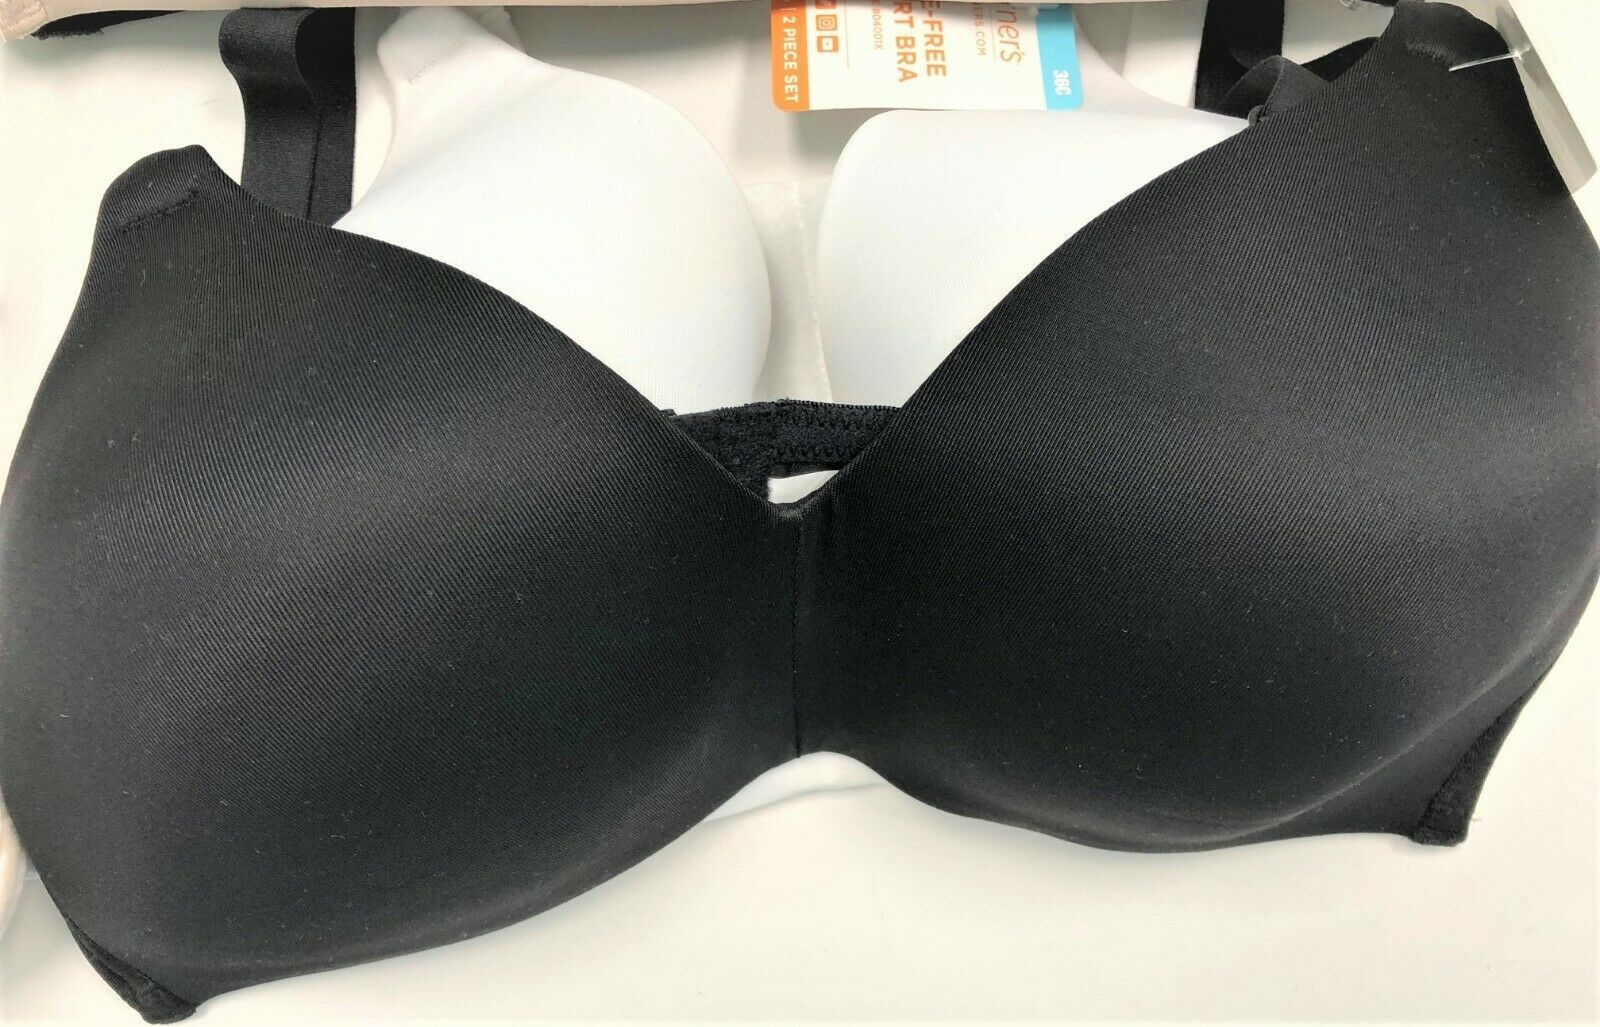 Warners Wirefree Bras T-Shirt Lined Seamless Cups Set of 2 Style 4011  Retail $60